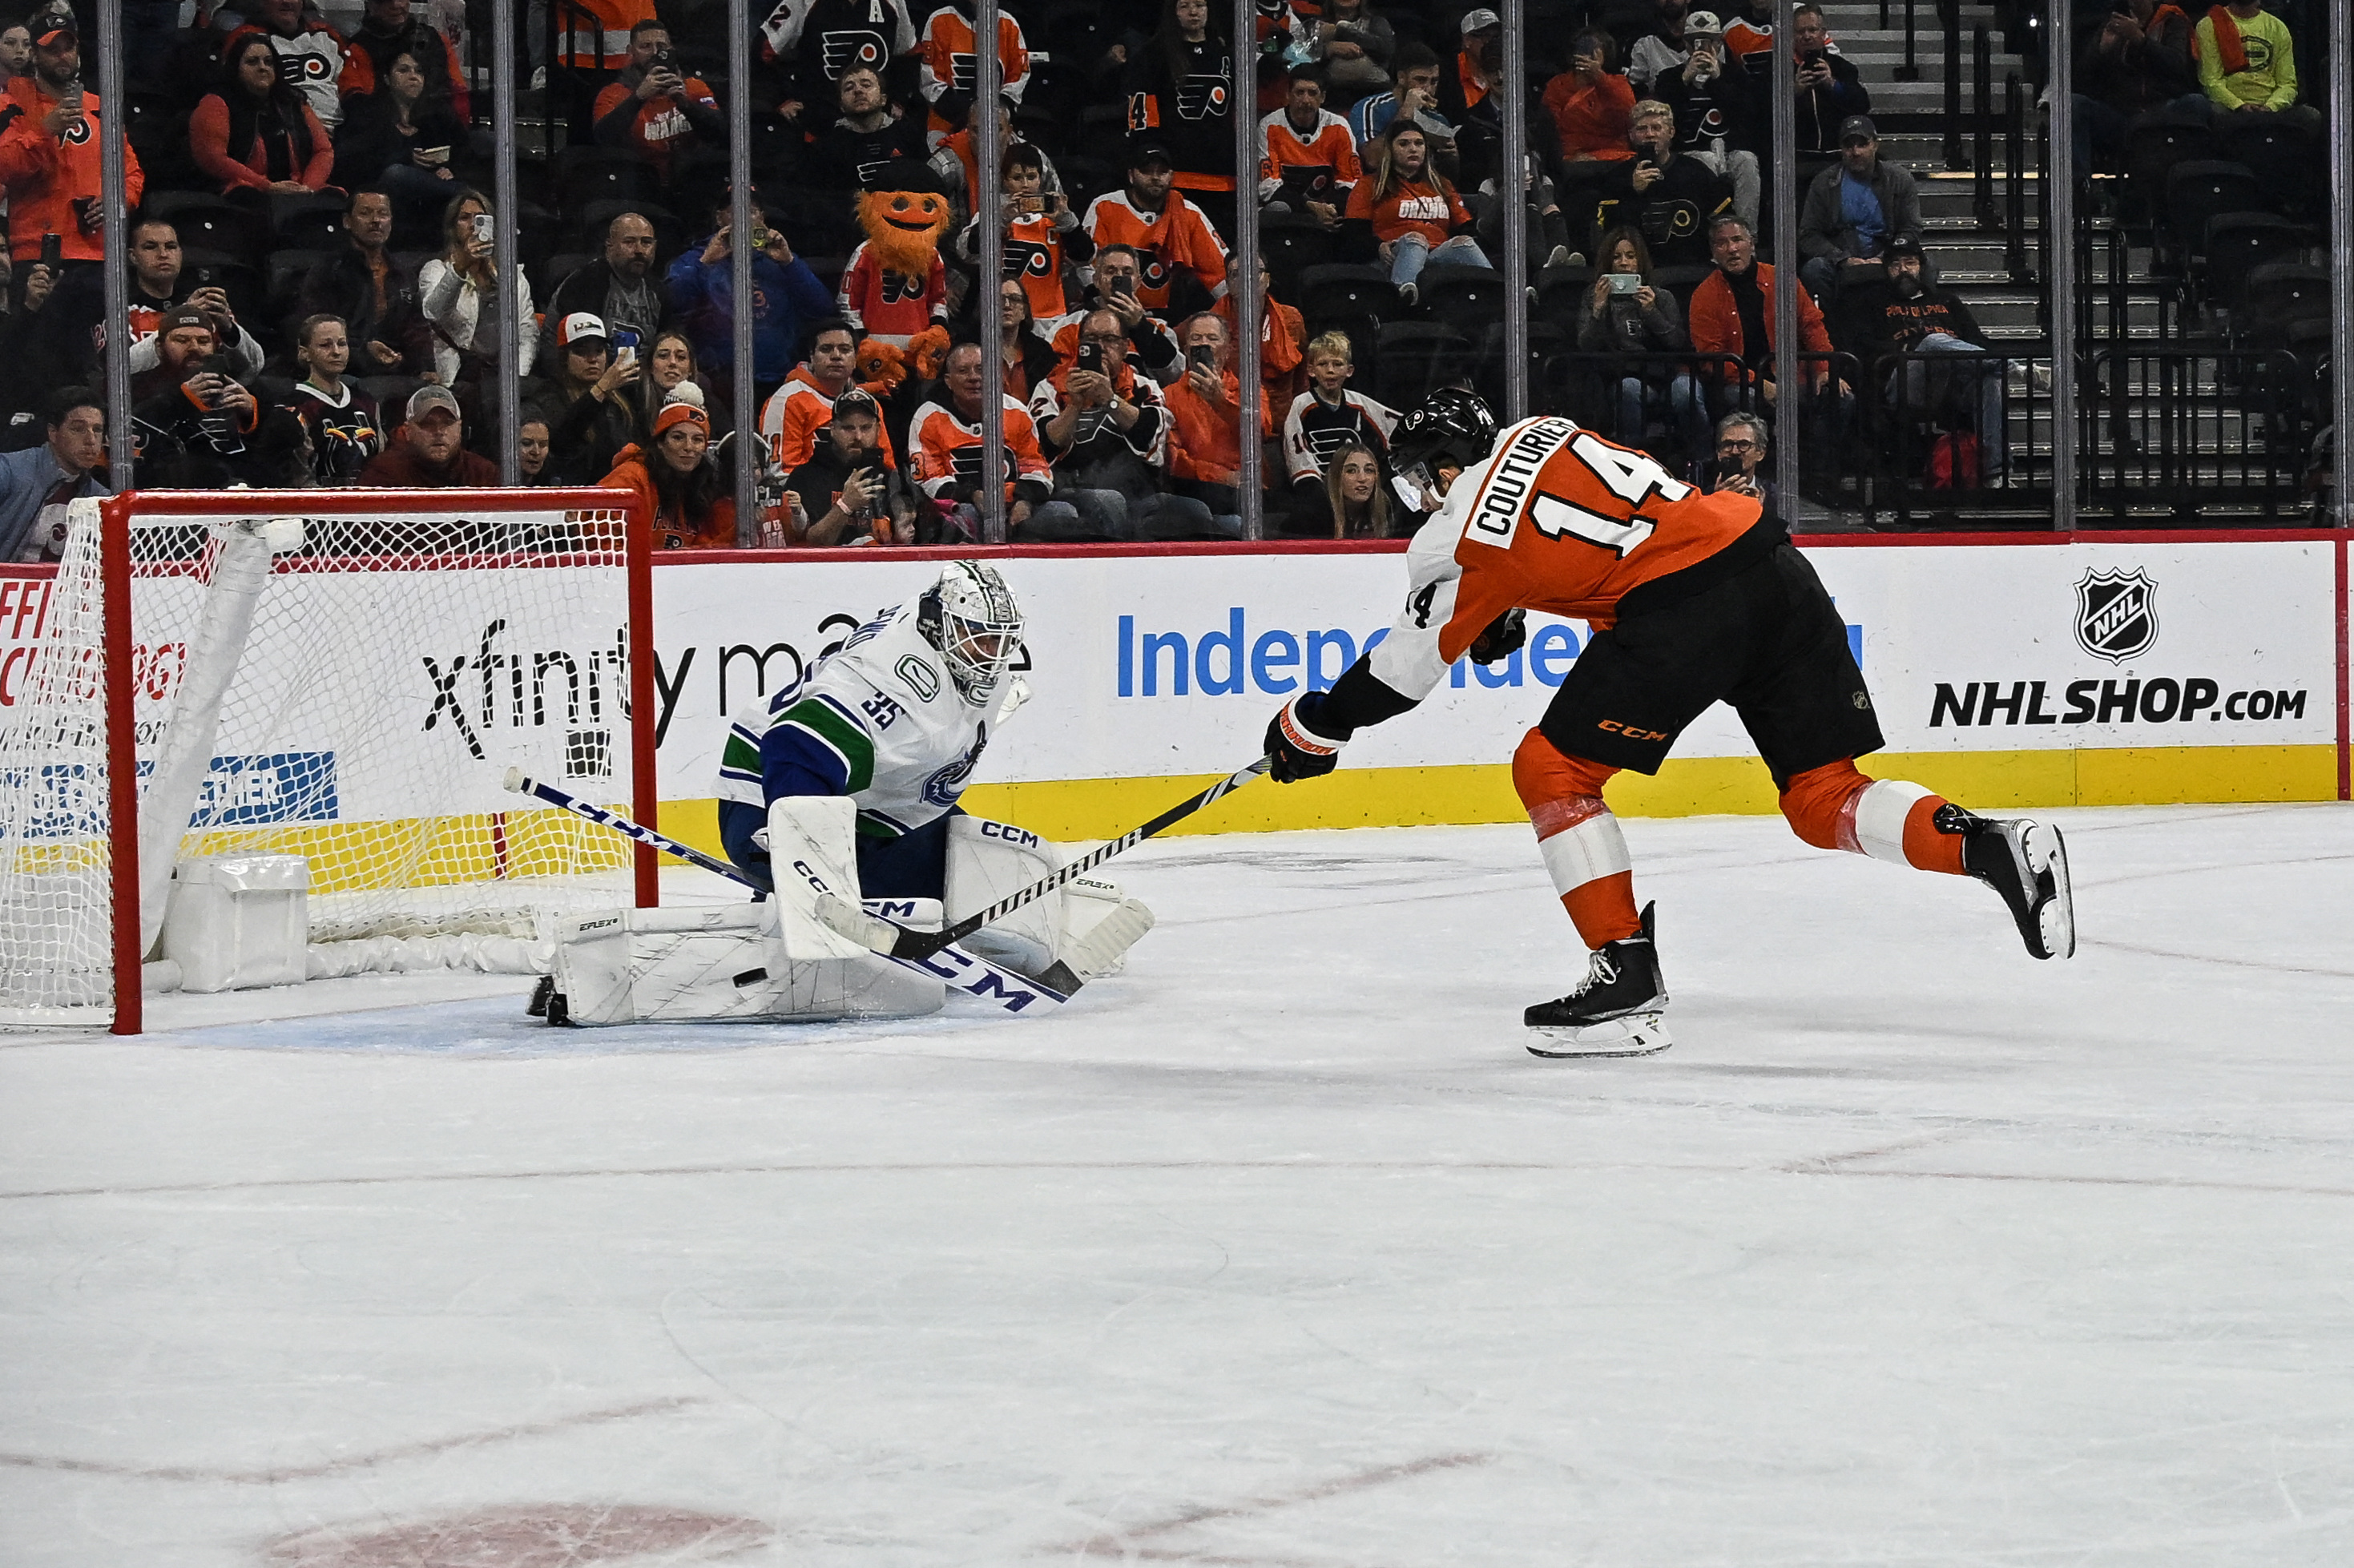 Sean Couturier scores as Flyers shut out Canucks